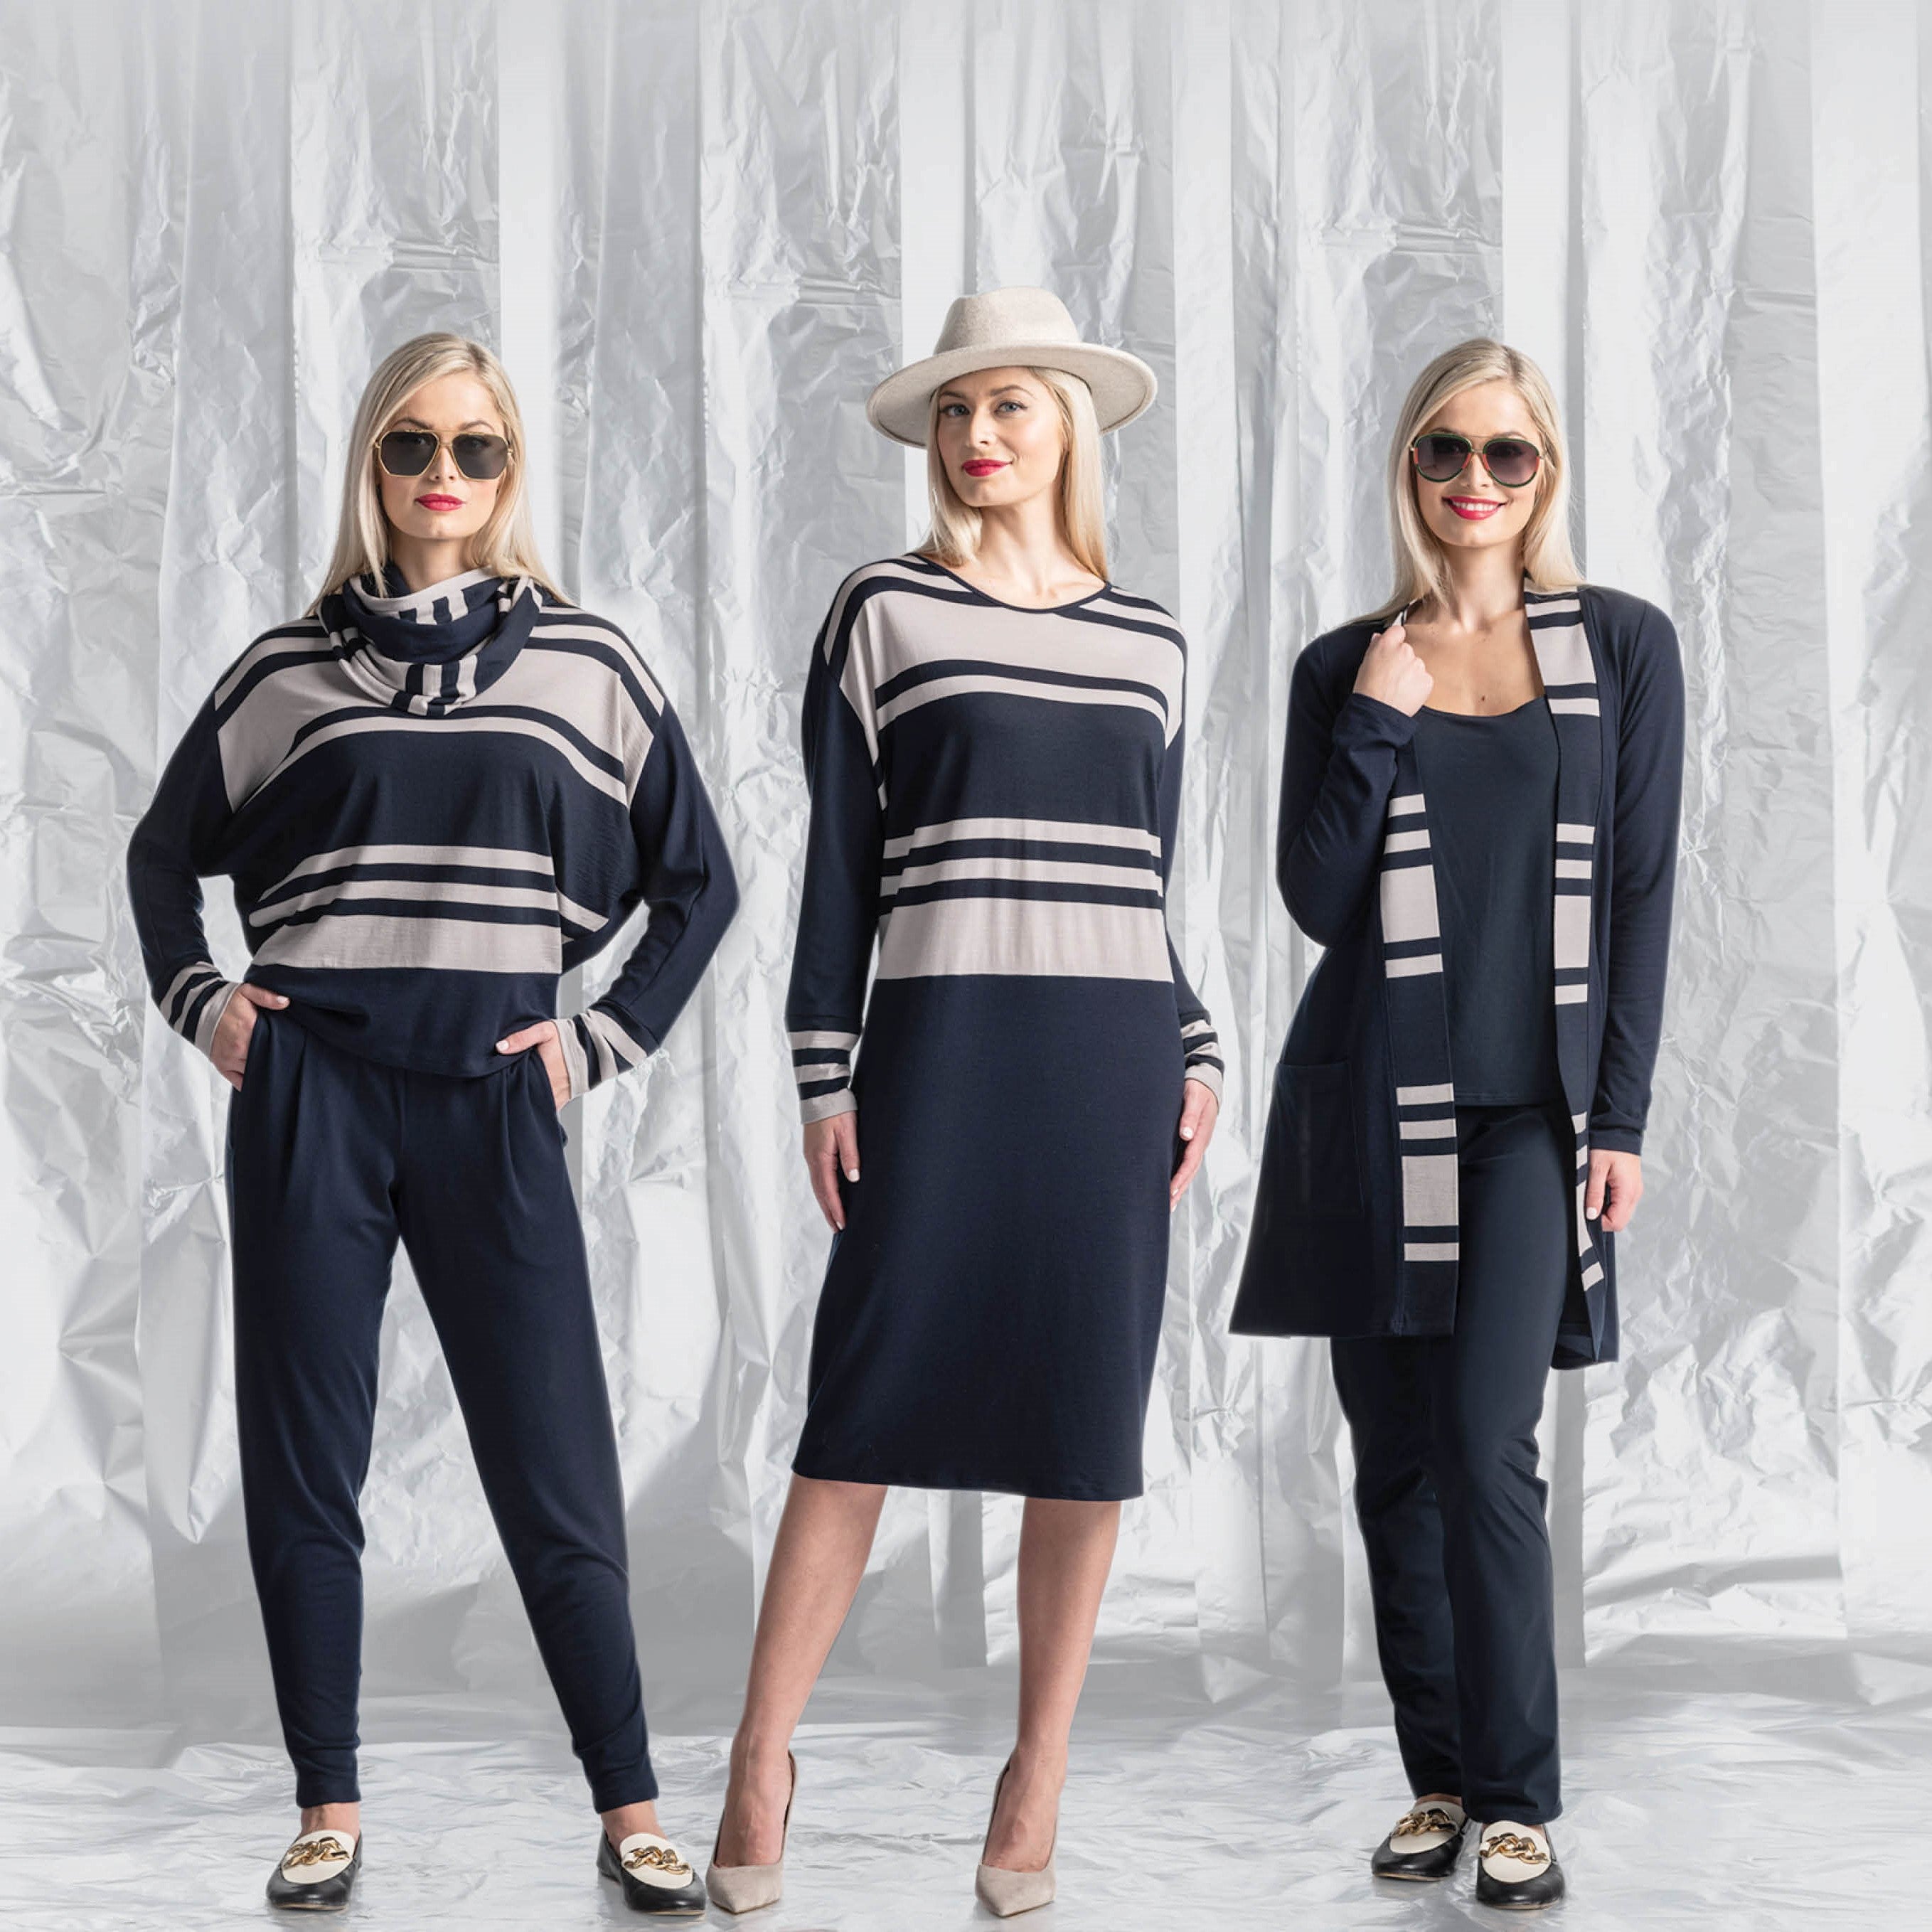 Classic & Chic in Navy Stripes